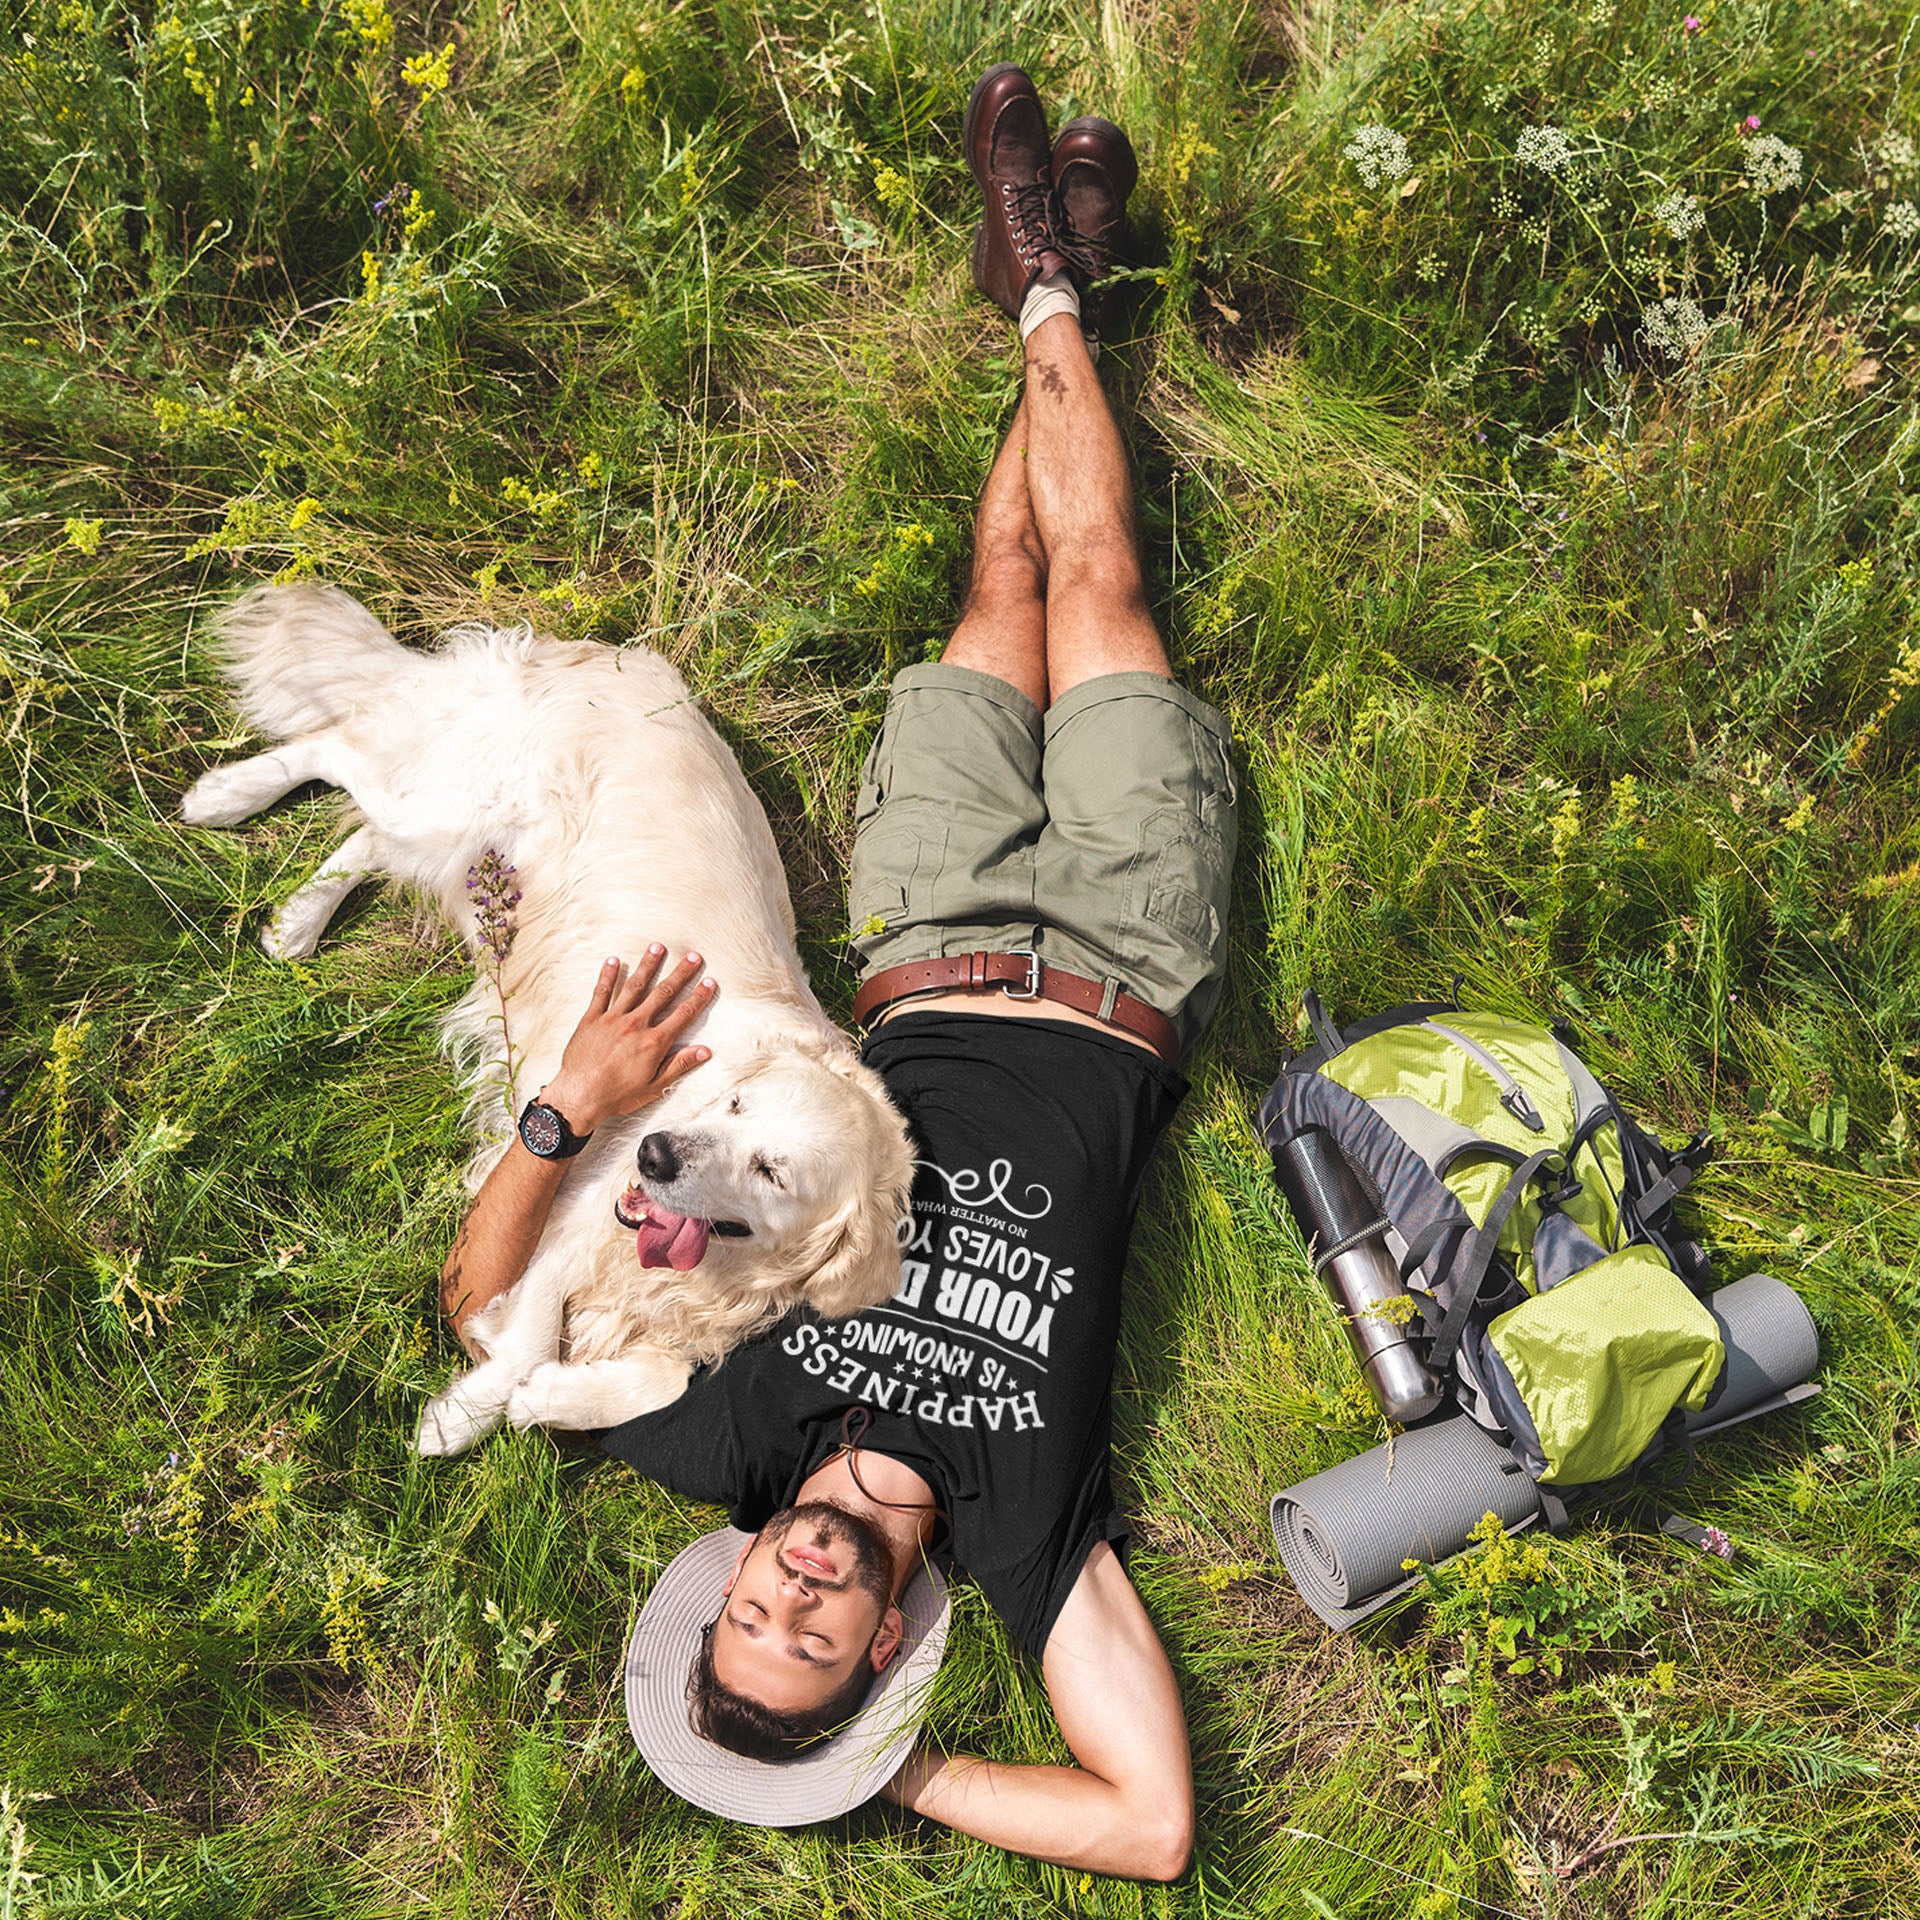  A man wearing a Dogs Pure Love tee lies on the grass next to his backpack, with his legs crossed and one hand behind his head, while the other arm is wrapped around his Golden Retriever.